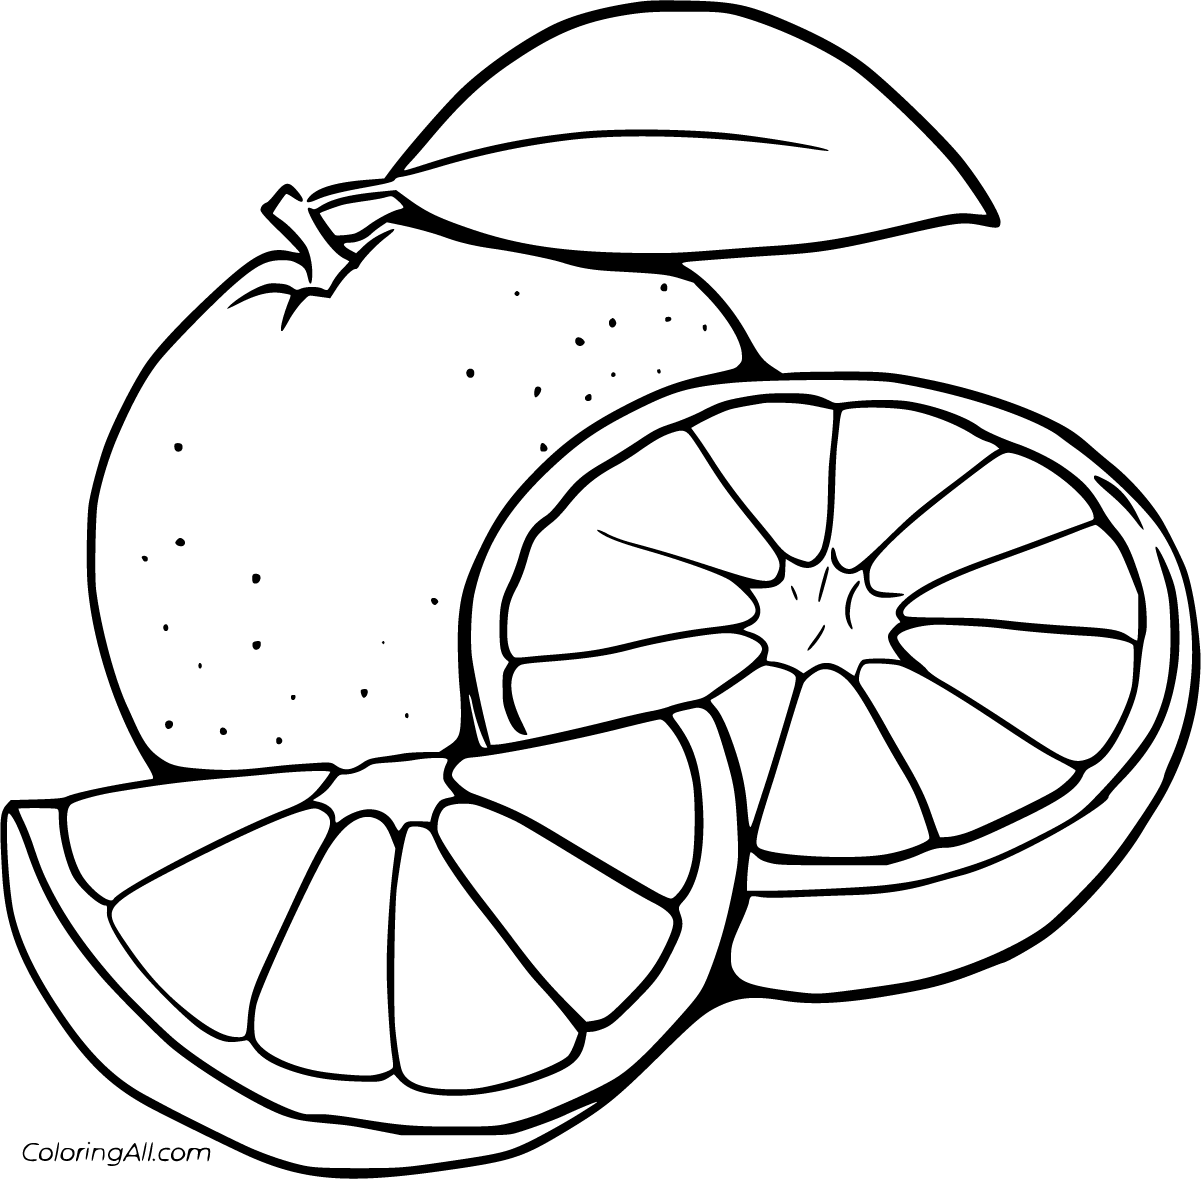 Orange Coloring Pages - ColoringAll